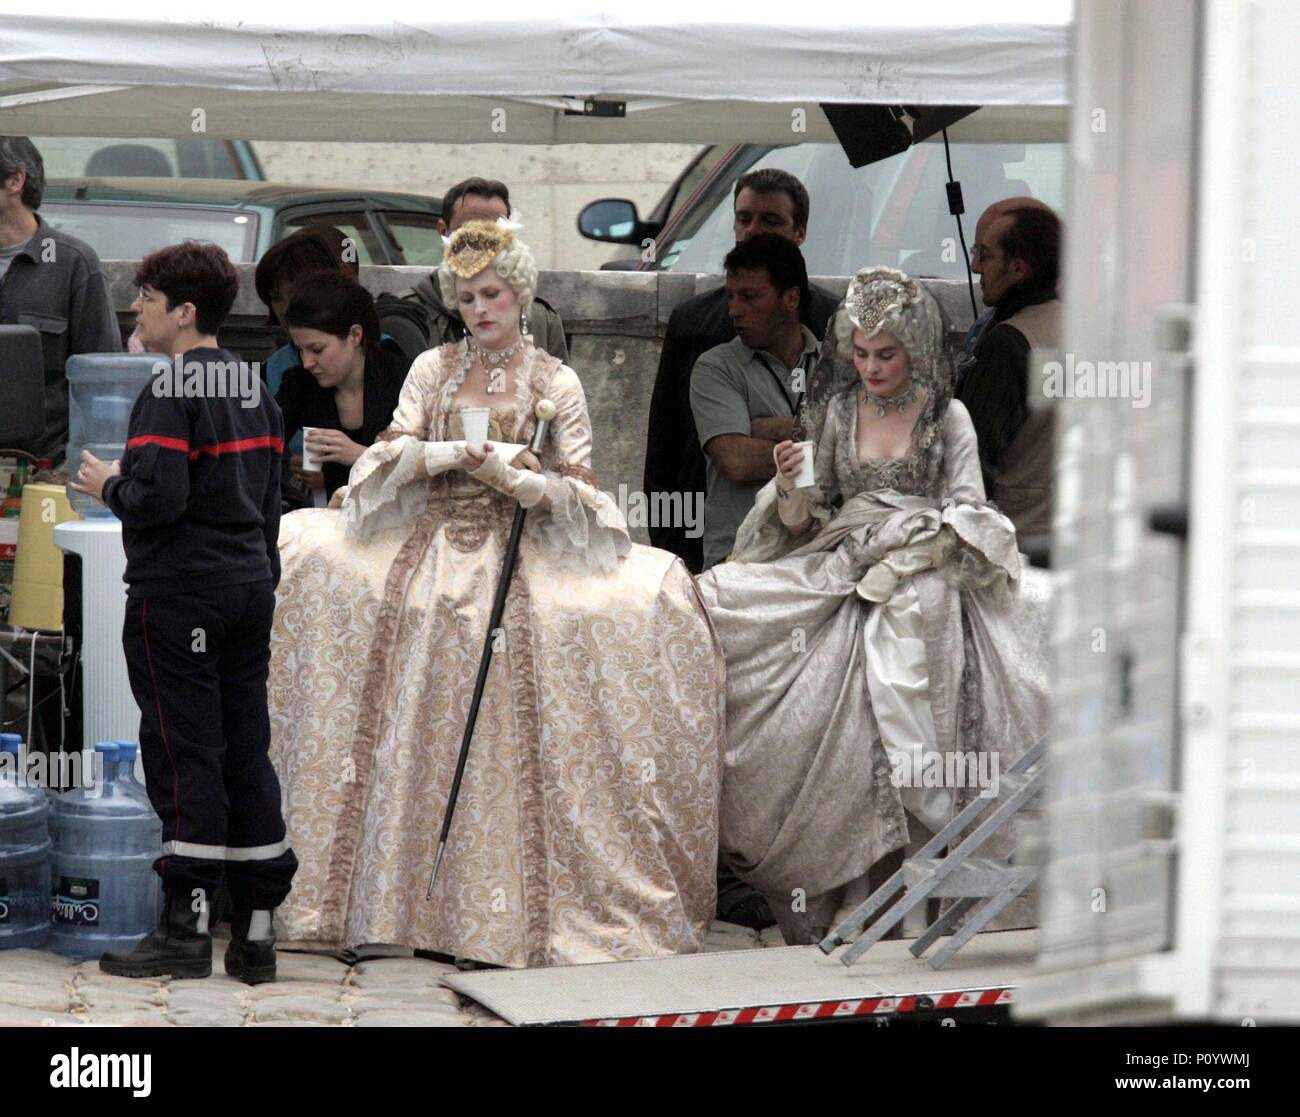 Original Film Title: MARIE ANTOINETTE.  English Title: MARIE ANTOINETTE.  Film Director: SOFIA COPPOLA.  Year: 2006.  Stars: MOLLY SHANNON; SHIRLEY HENDERSON. Credit: COLUMBIA PICTURES CORPORATION/AMERICAN ZOETROPE / Album Stock Photo